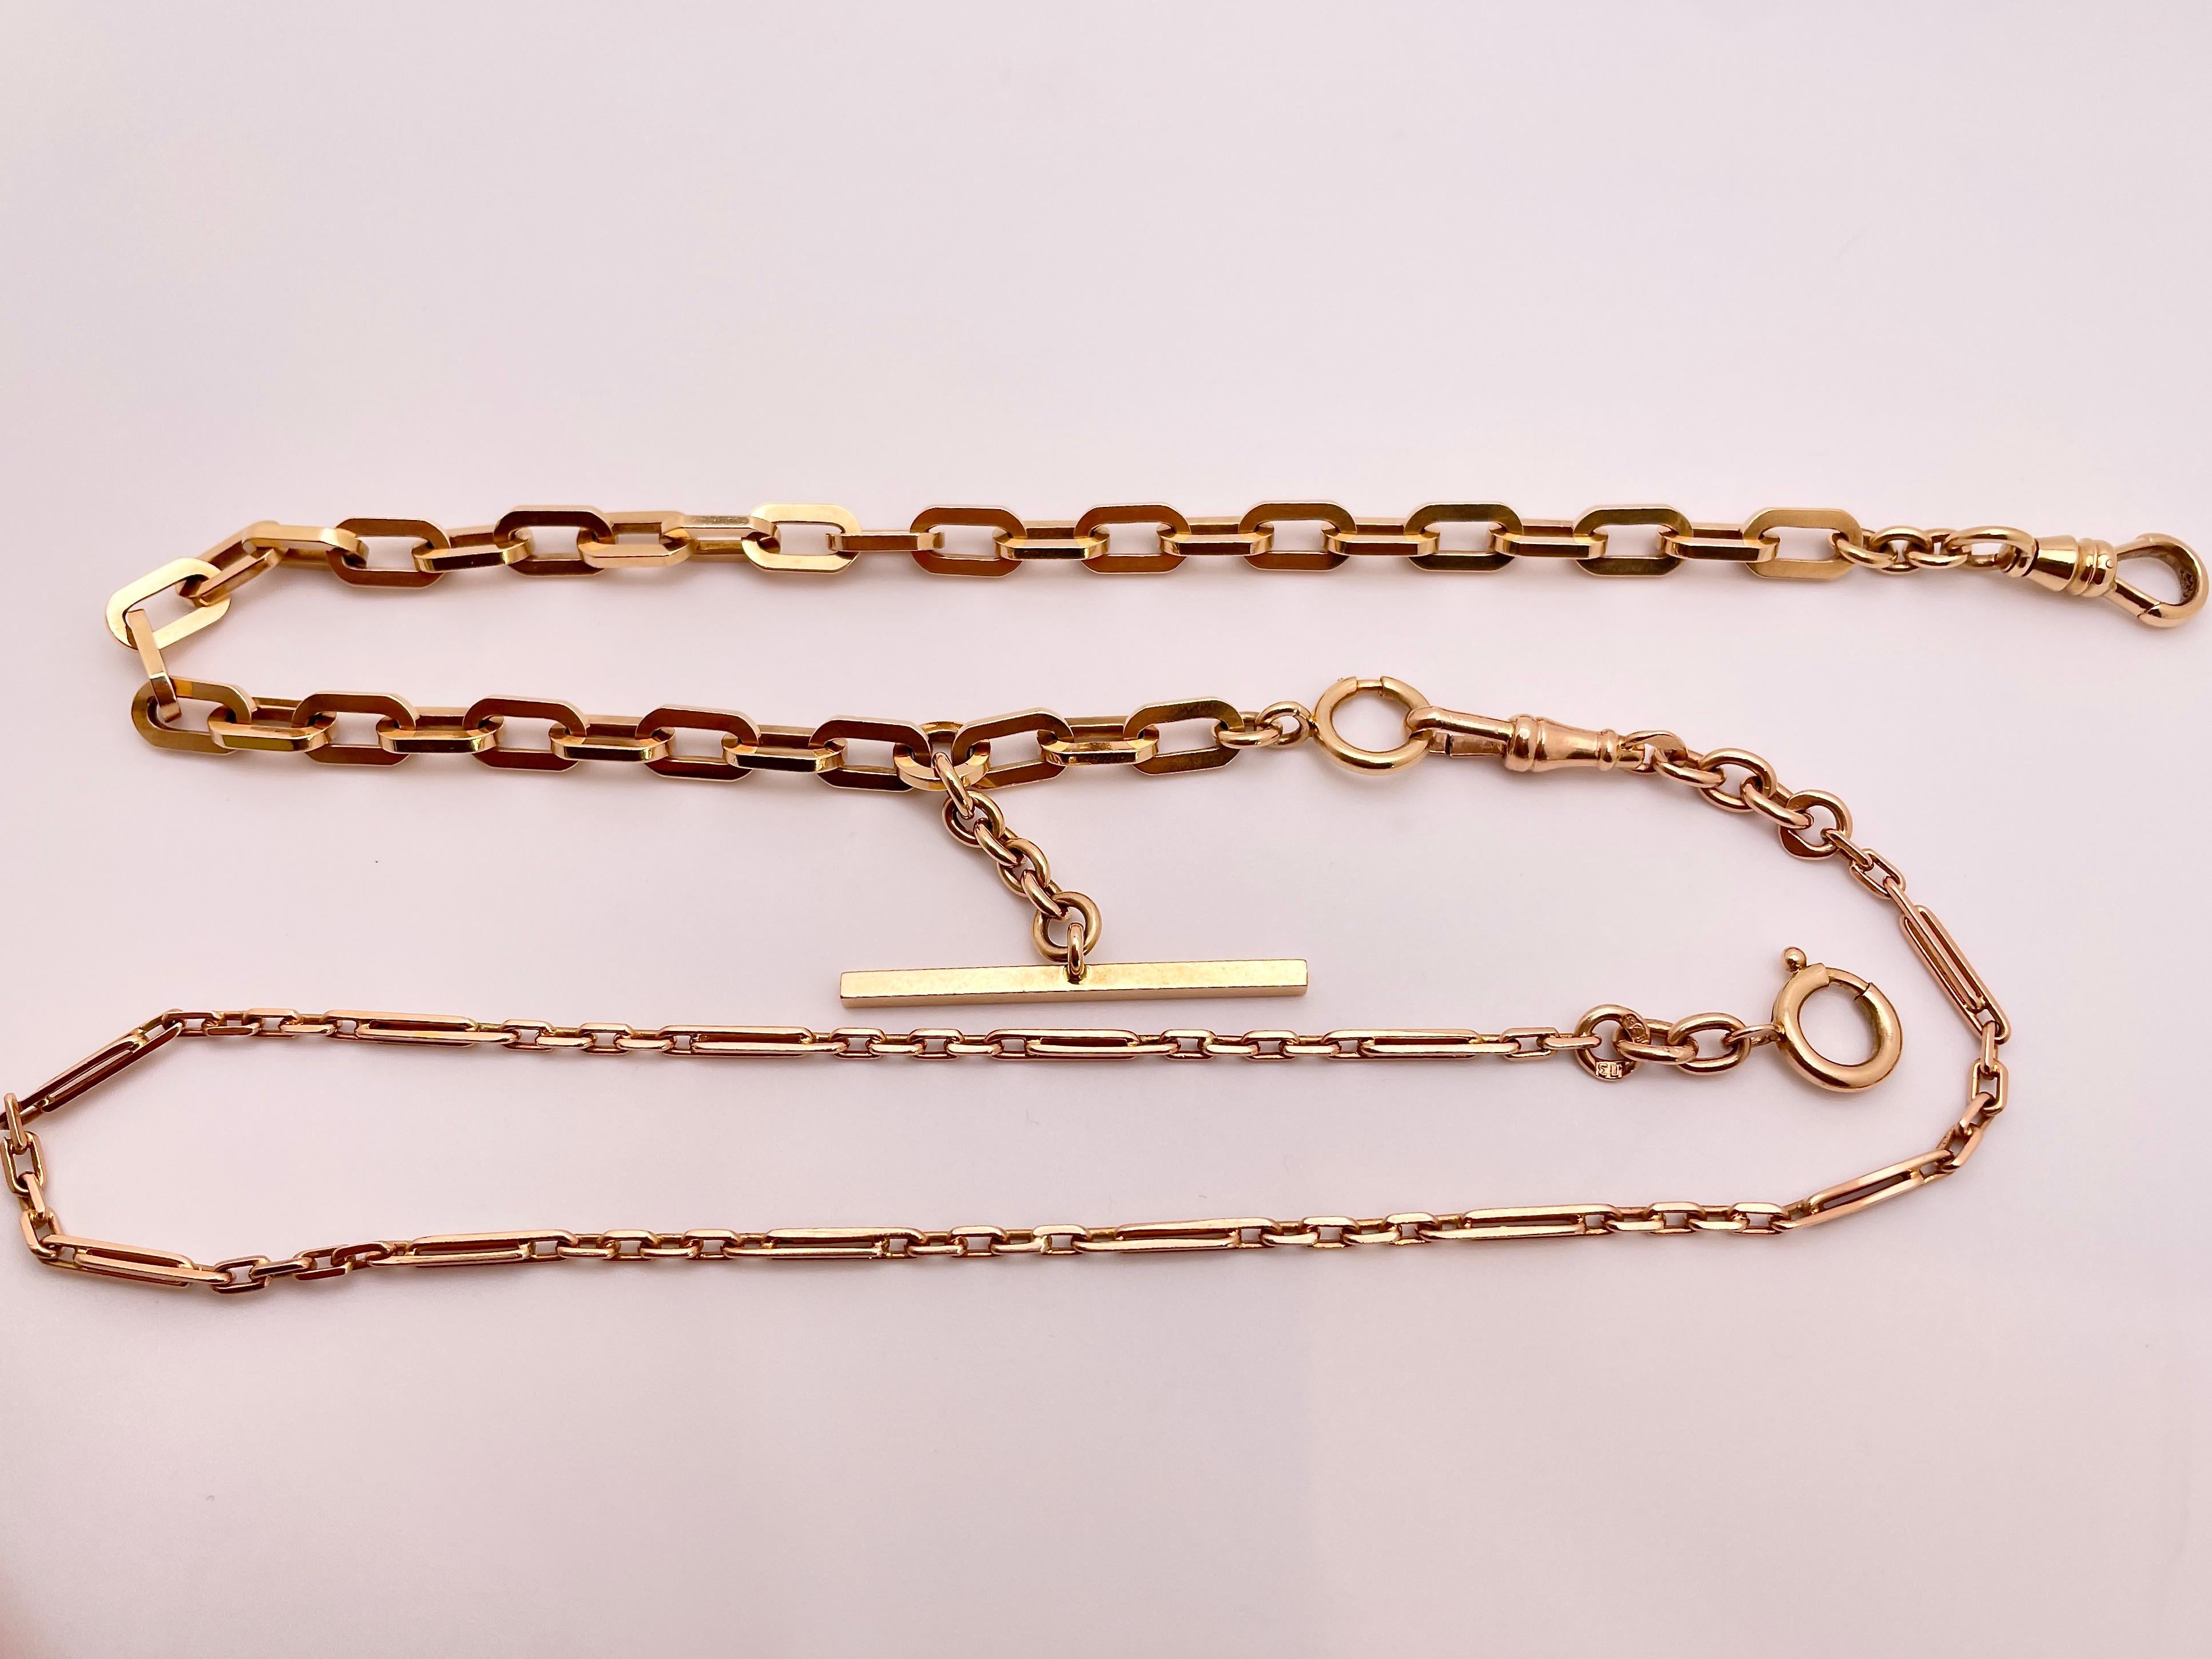 An antique 14K rose gold detachable link necklace. A combination of two unique, thick and thin, original 1930's-40's rose gold pocket watch chains. This beautiful piece can be worn as one long necklace and separately as a